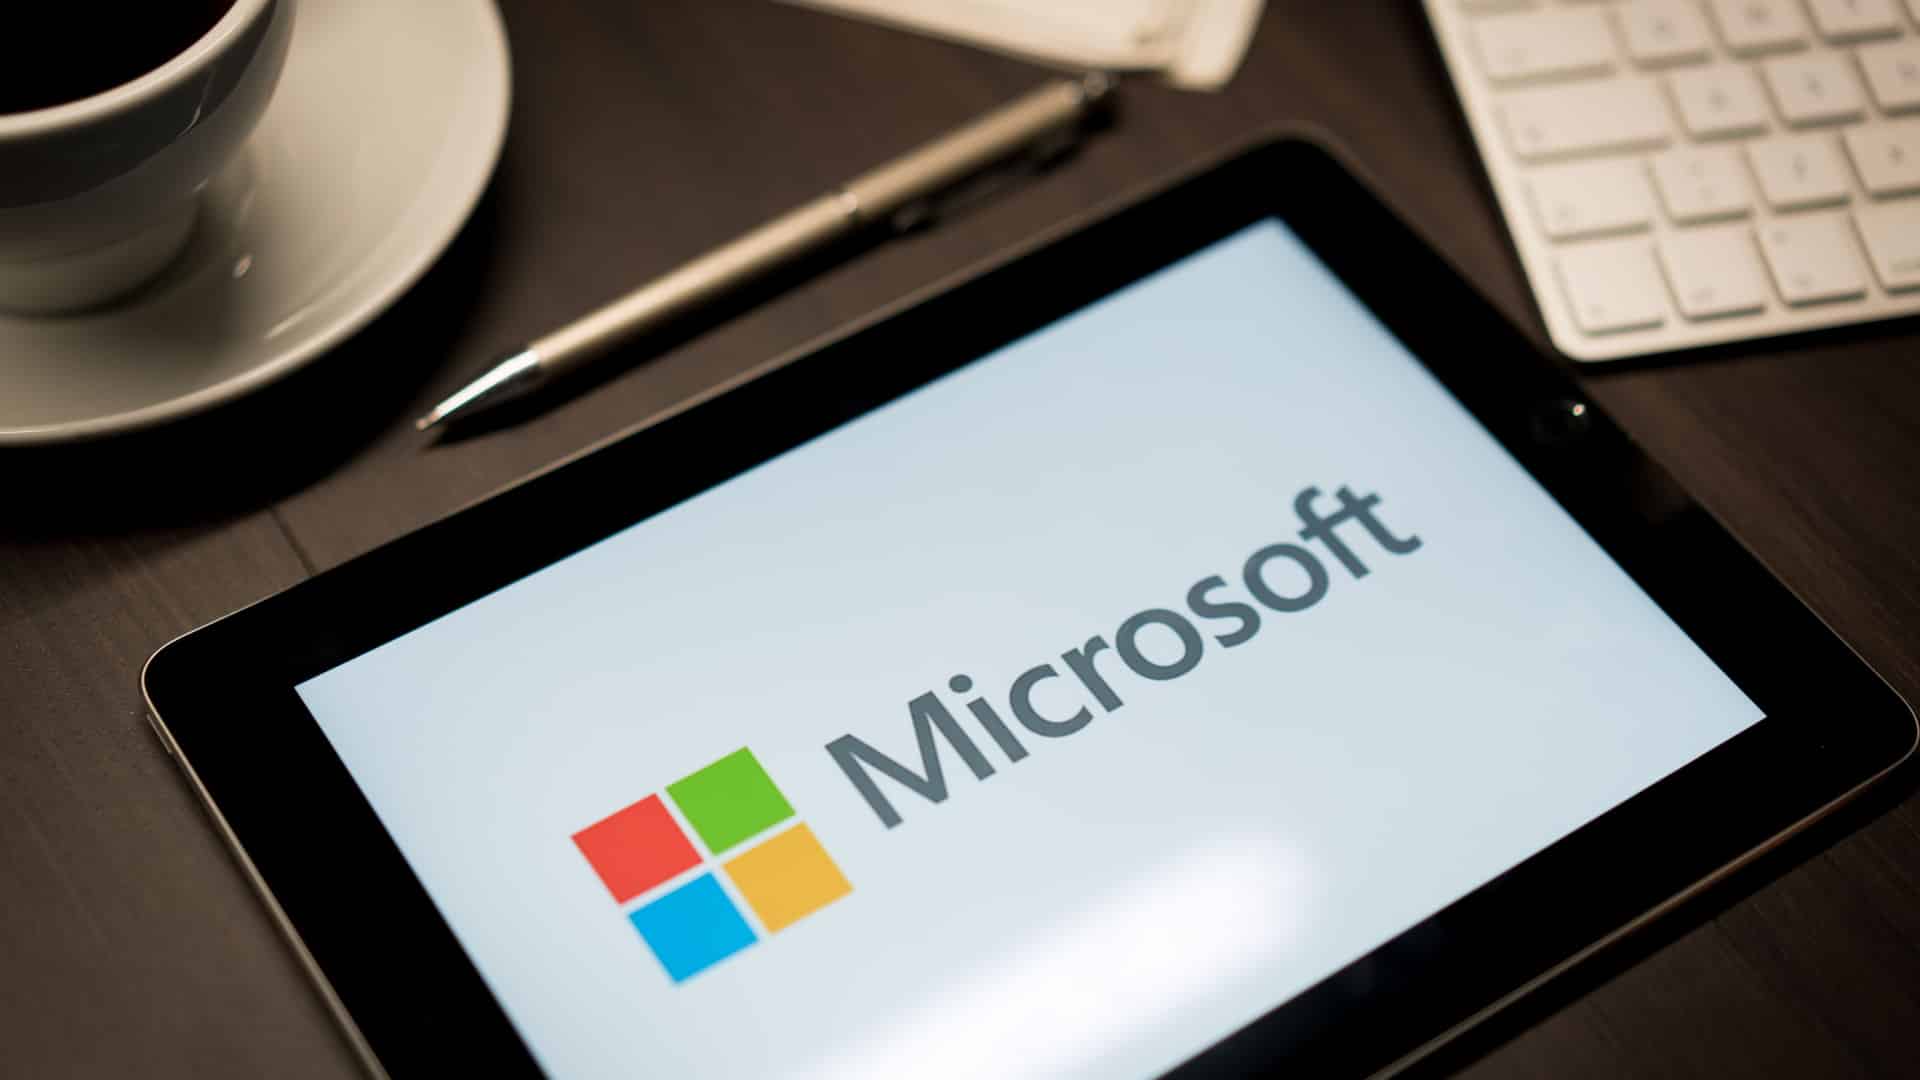 Microsoft backtracks on banning ads from unverified advertisers